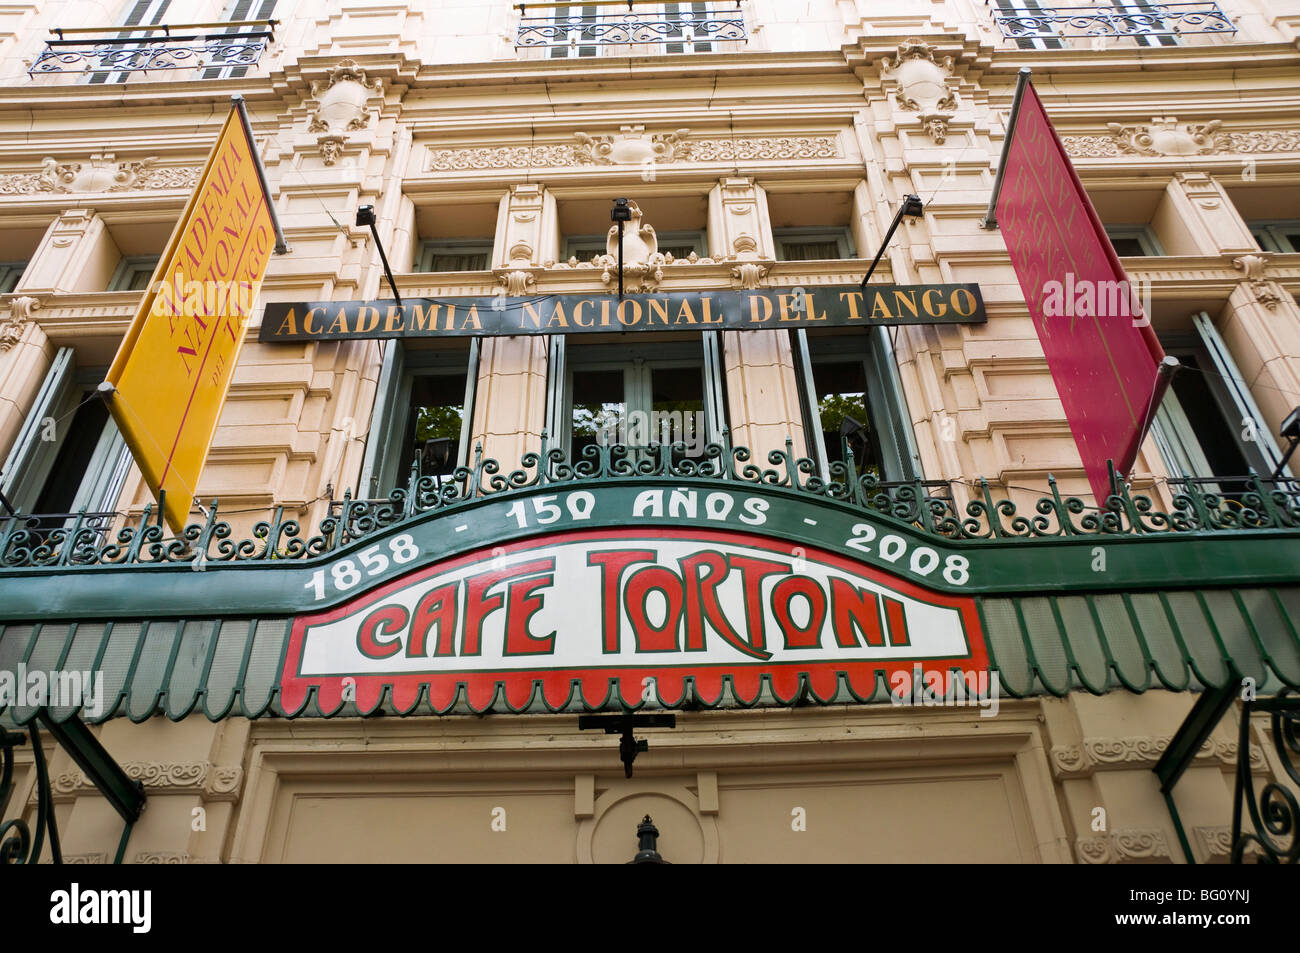 Cafe Tortoni, a famous tango cafe restaurant located on Avenue de Mayo, Buenos Aires, Argentina, South America Stock Photo